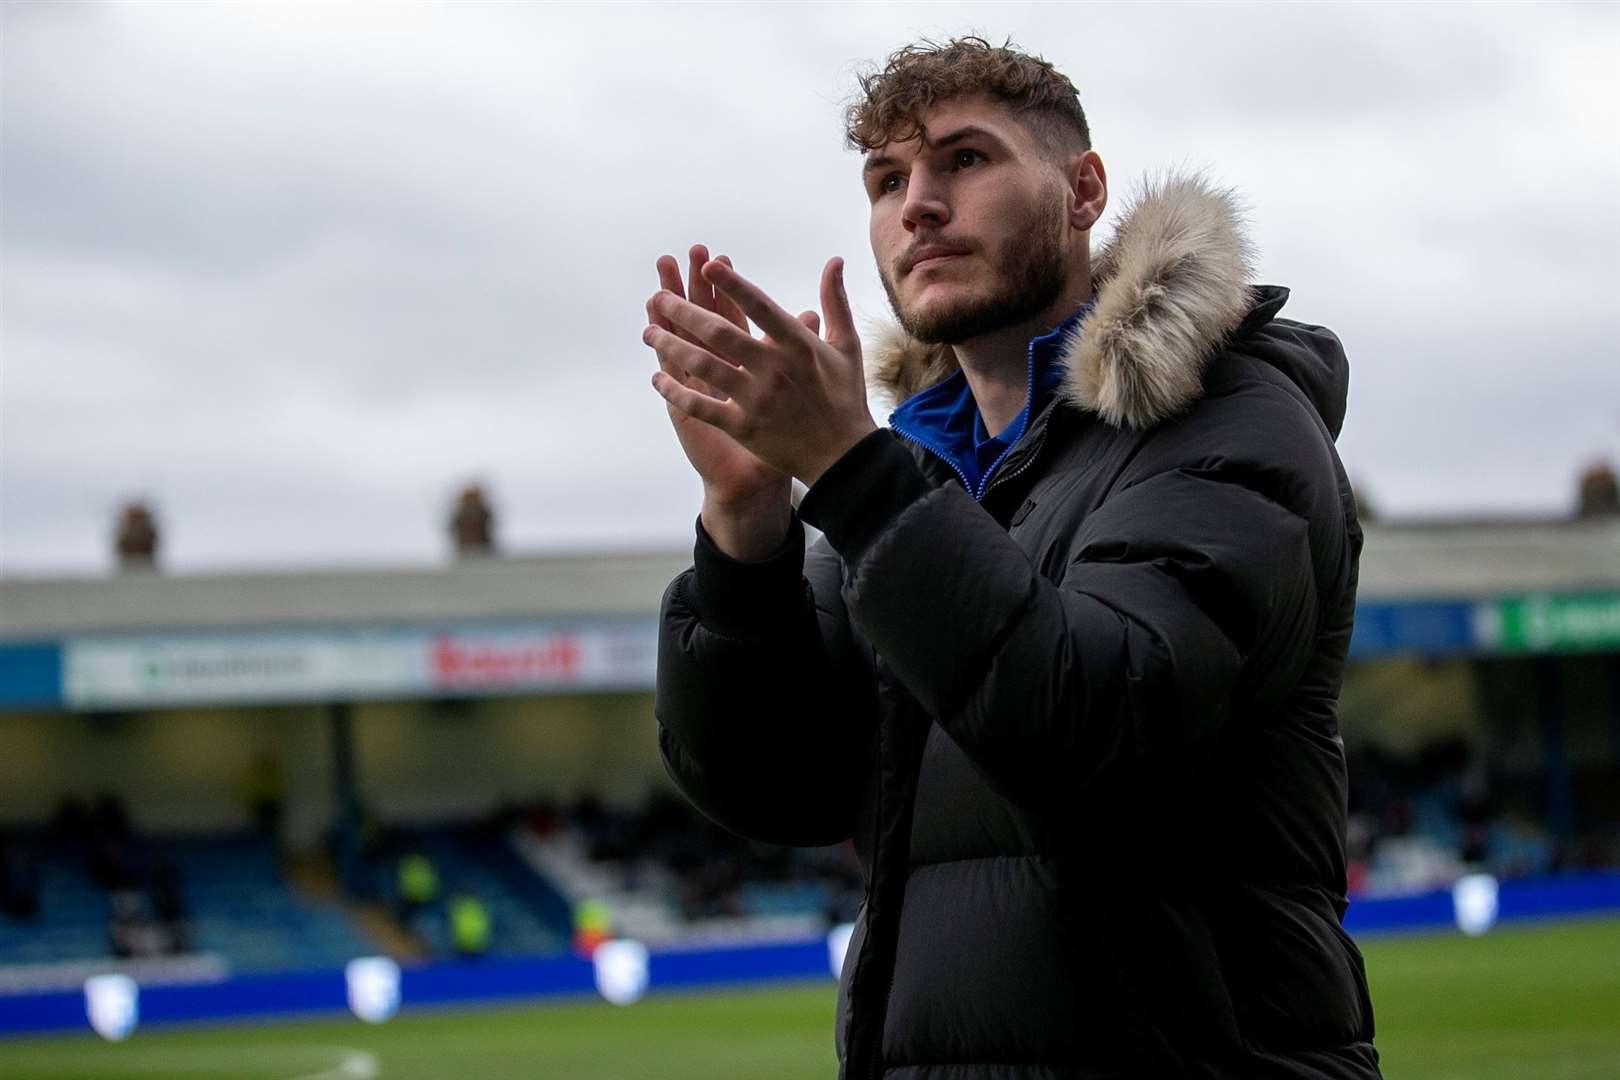 Josh Andrews hasn’t played for the Gills since making his move from Birmingham City Picture: @Julian_KPI